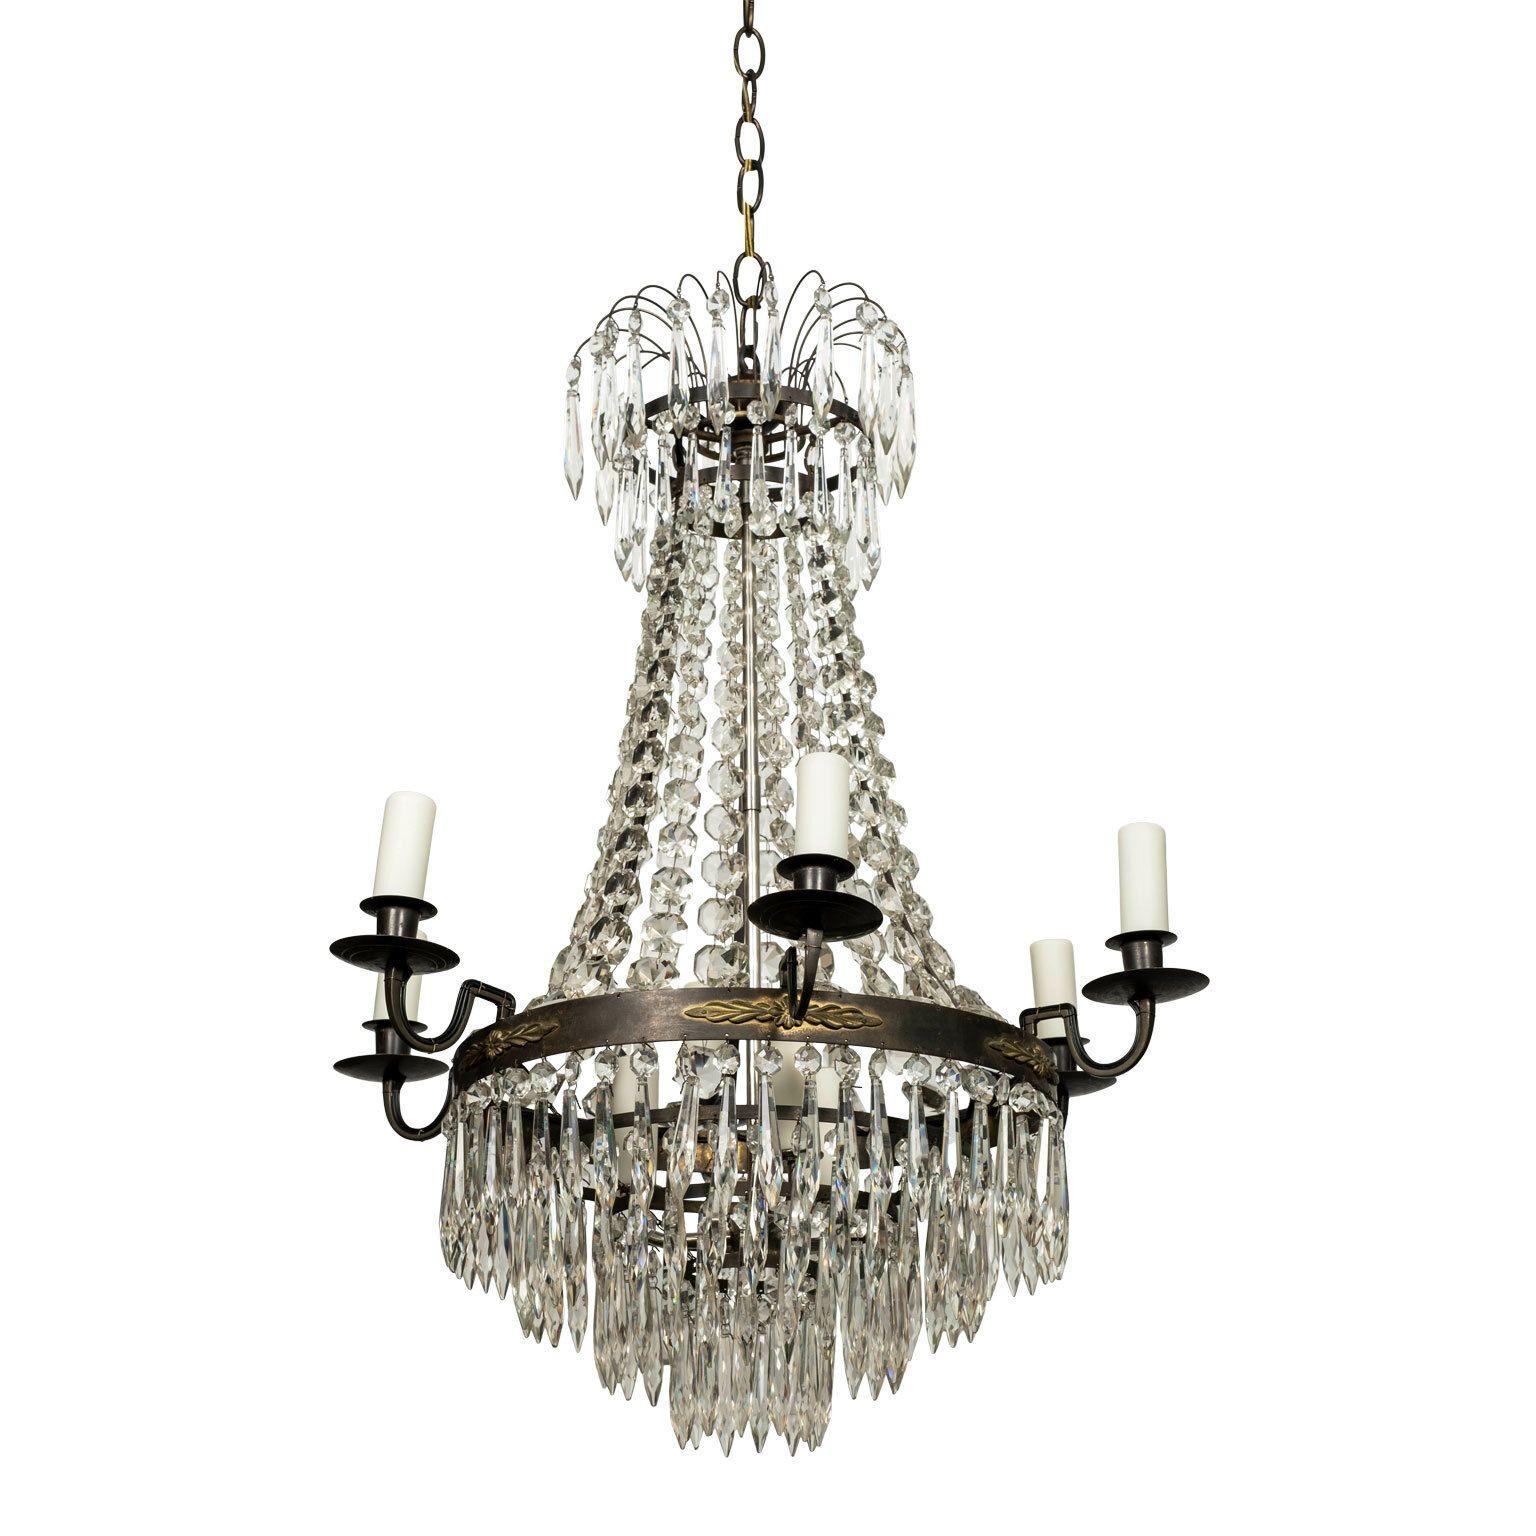 Hand-Crafted Neoclassical Swedish Gilt-Brass and Crystal Chandelier